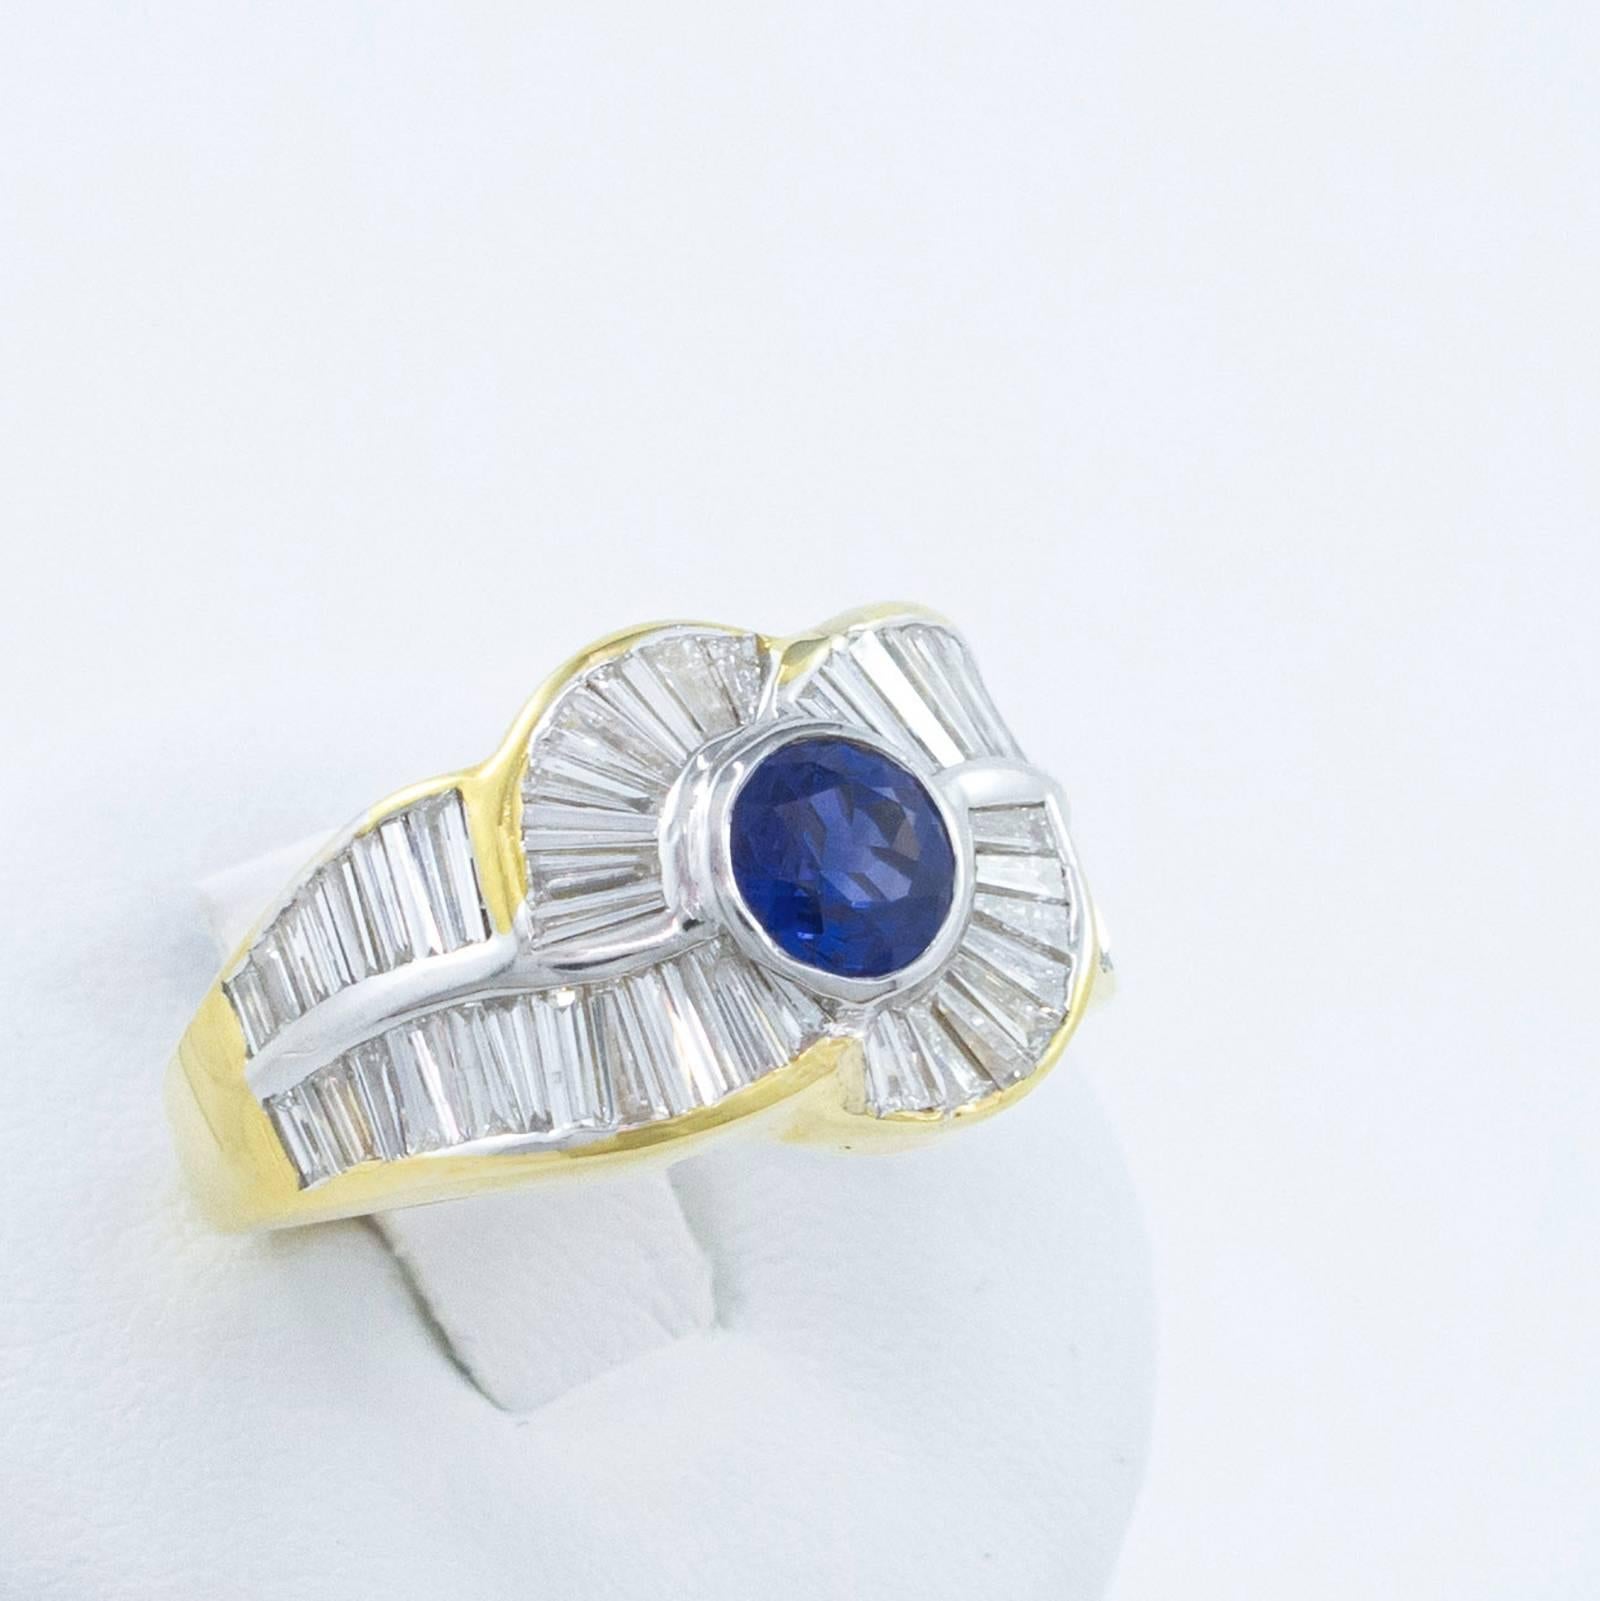 Striking 7.92 Carat Diamond Sapphire Ring In Excellent Condition For Sale In Toronto, Ontario